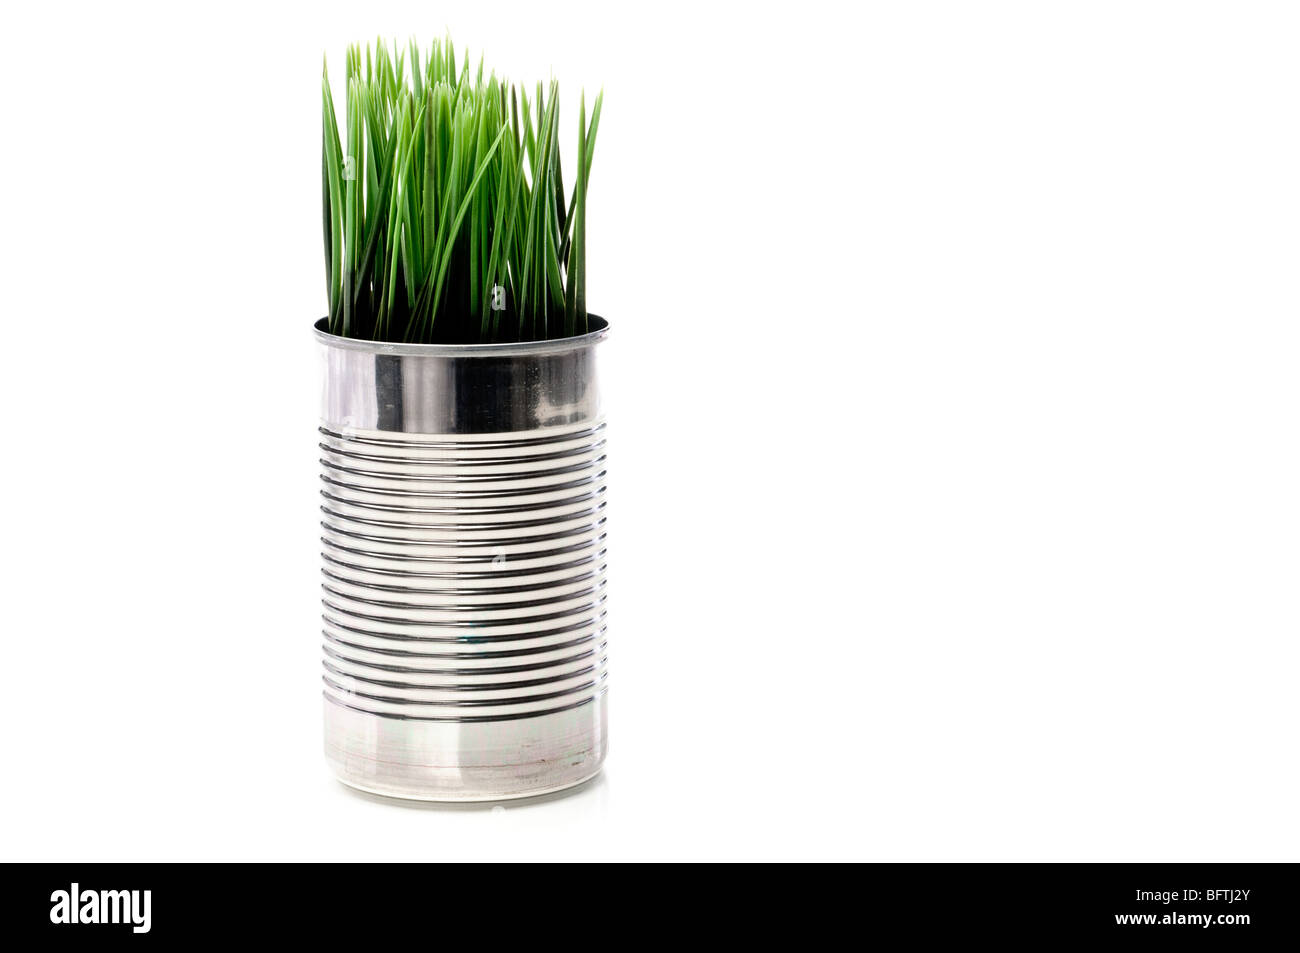 Horizontal image of green grass growing from a recycled aluminum can on white Stock Photo